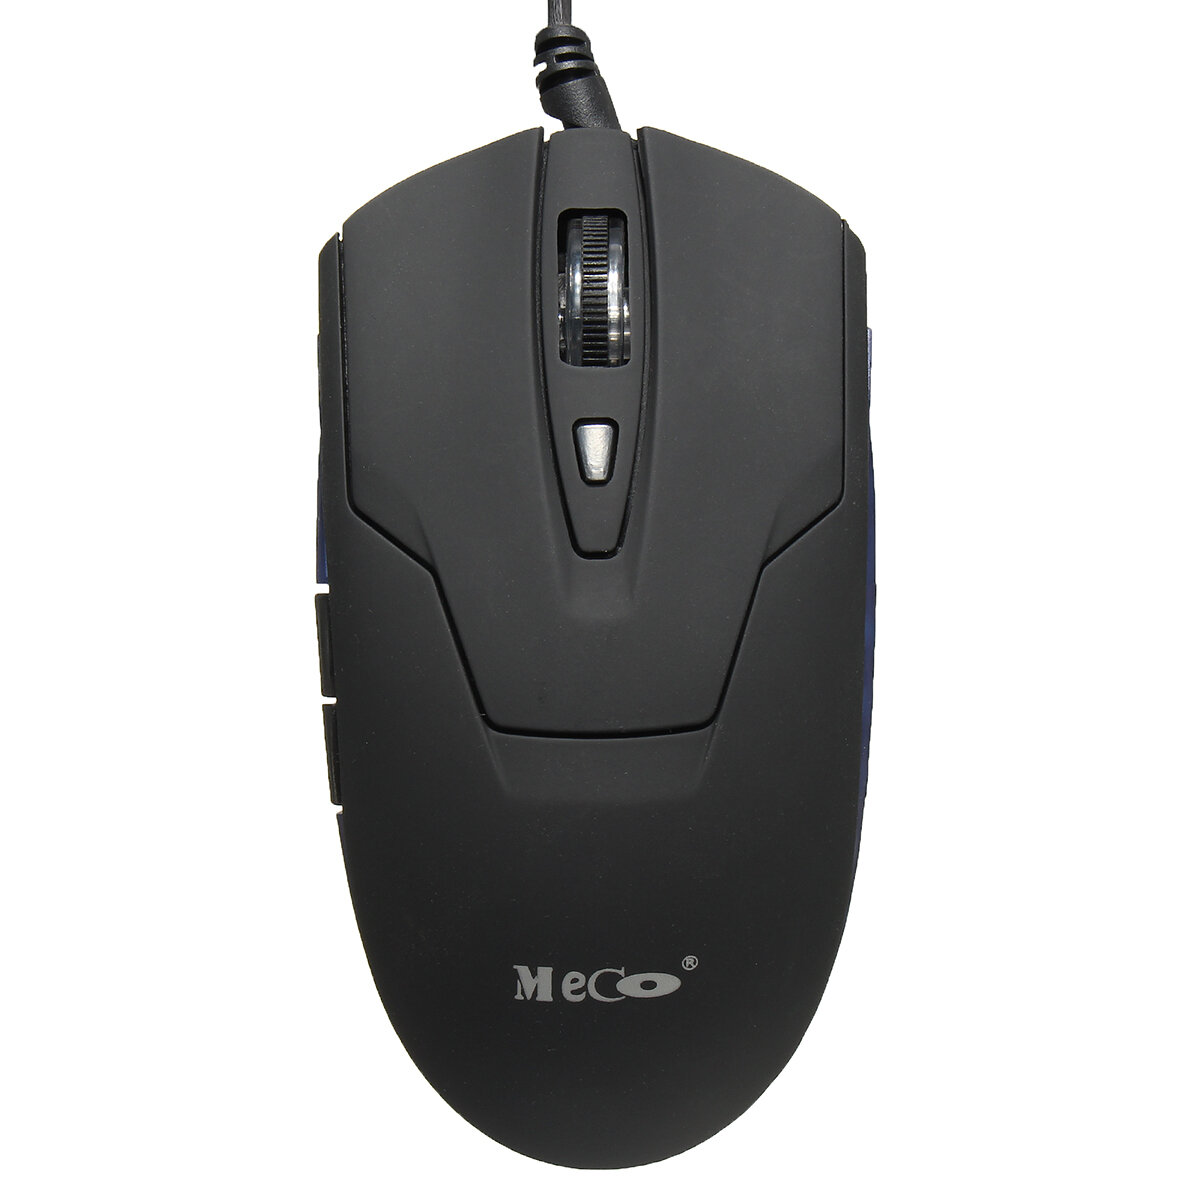 MECO Mouse LED-achtergrondverlichting Optische DPI Verstelbare bedrade computer Gaming Gamer Game Mo